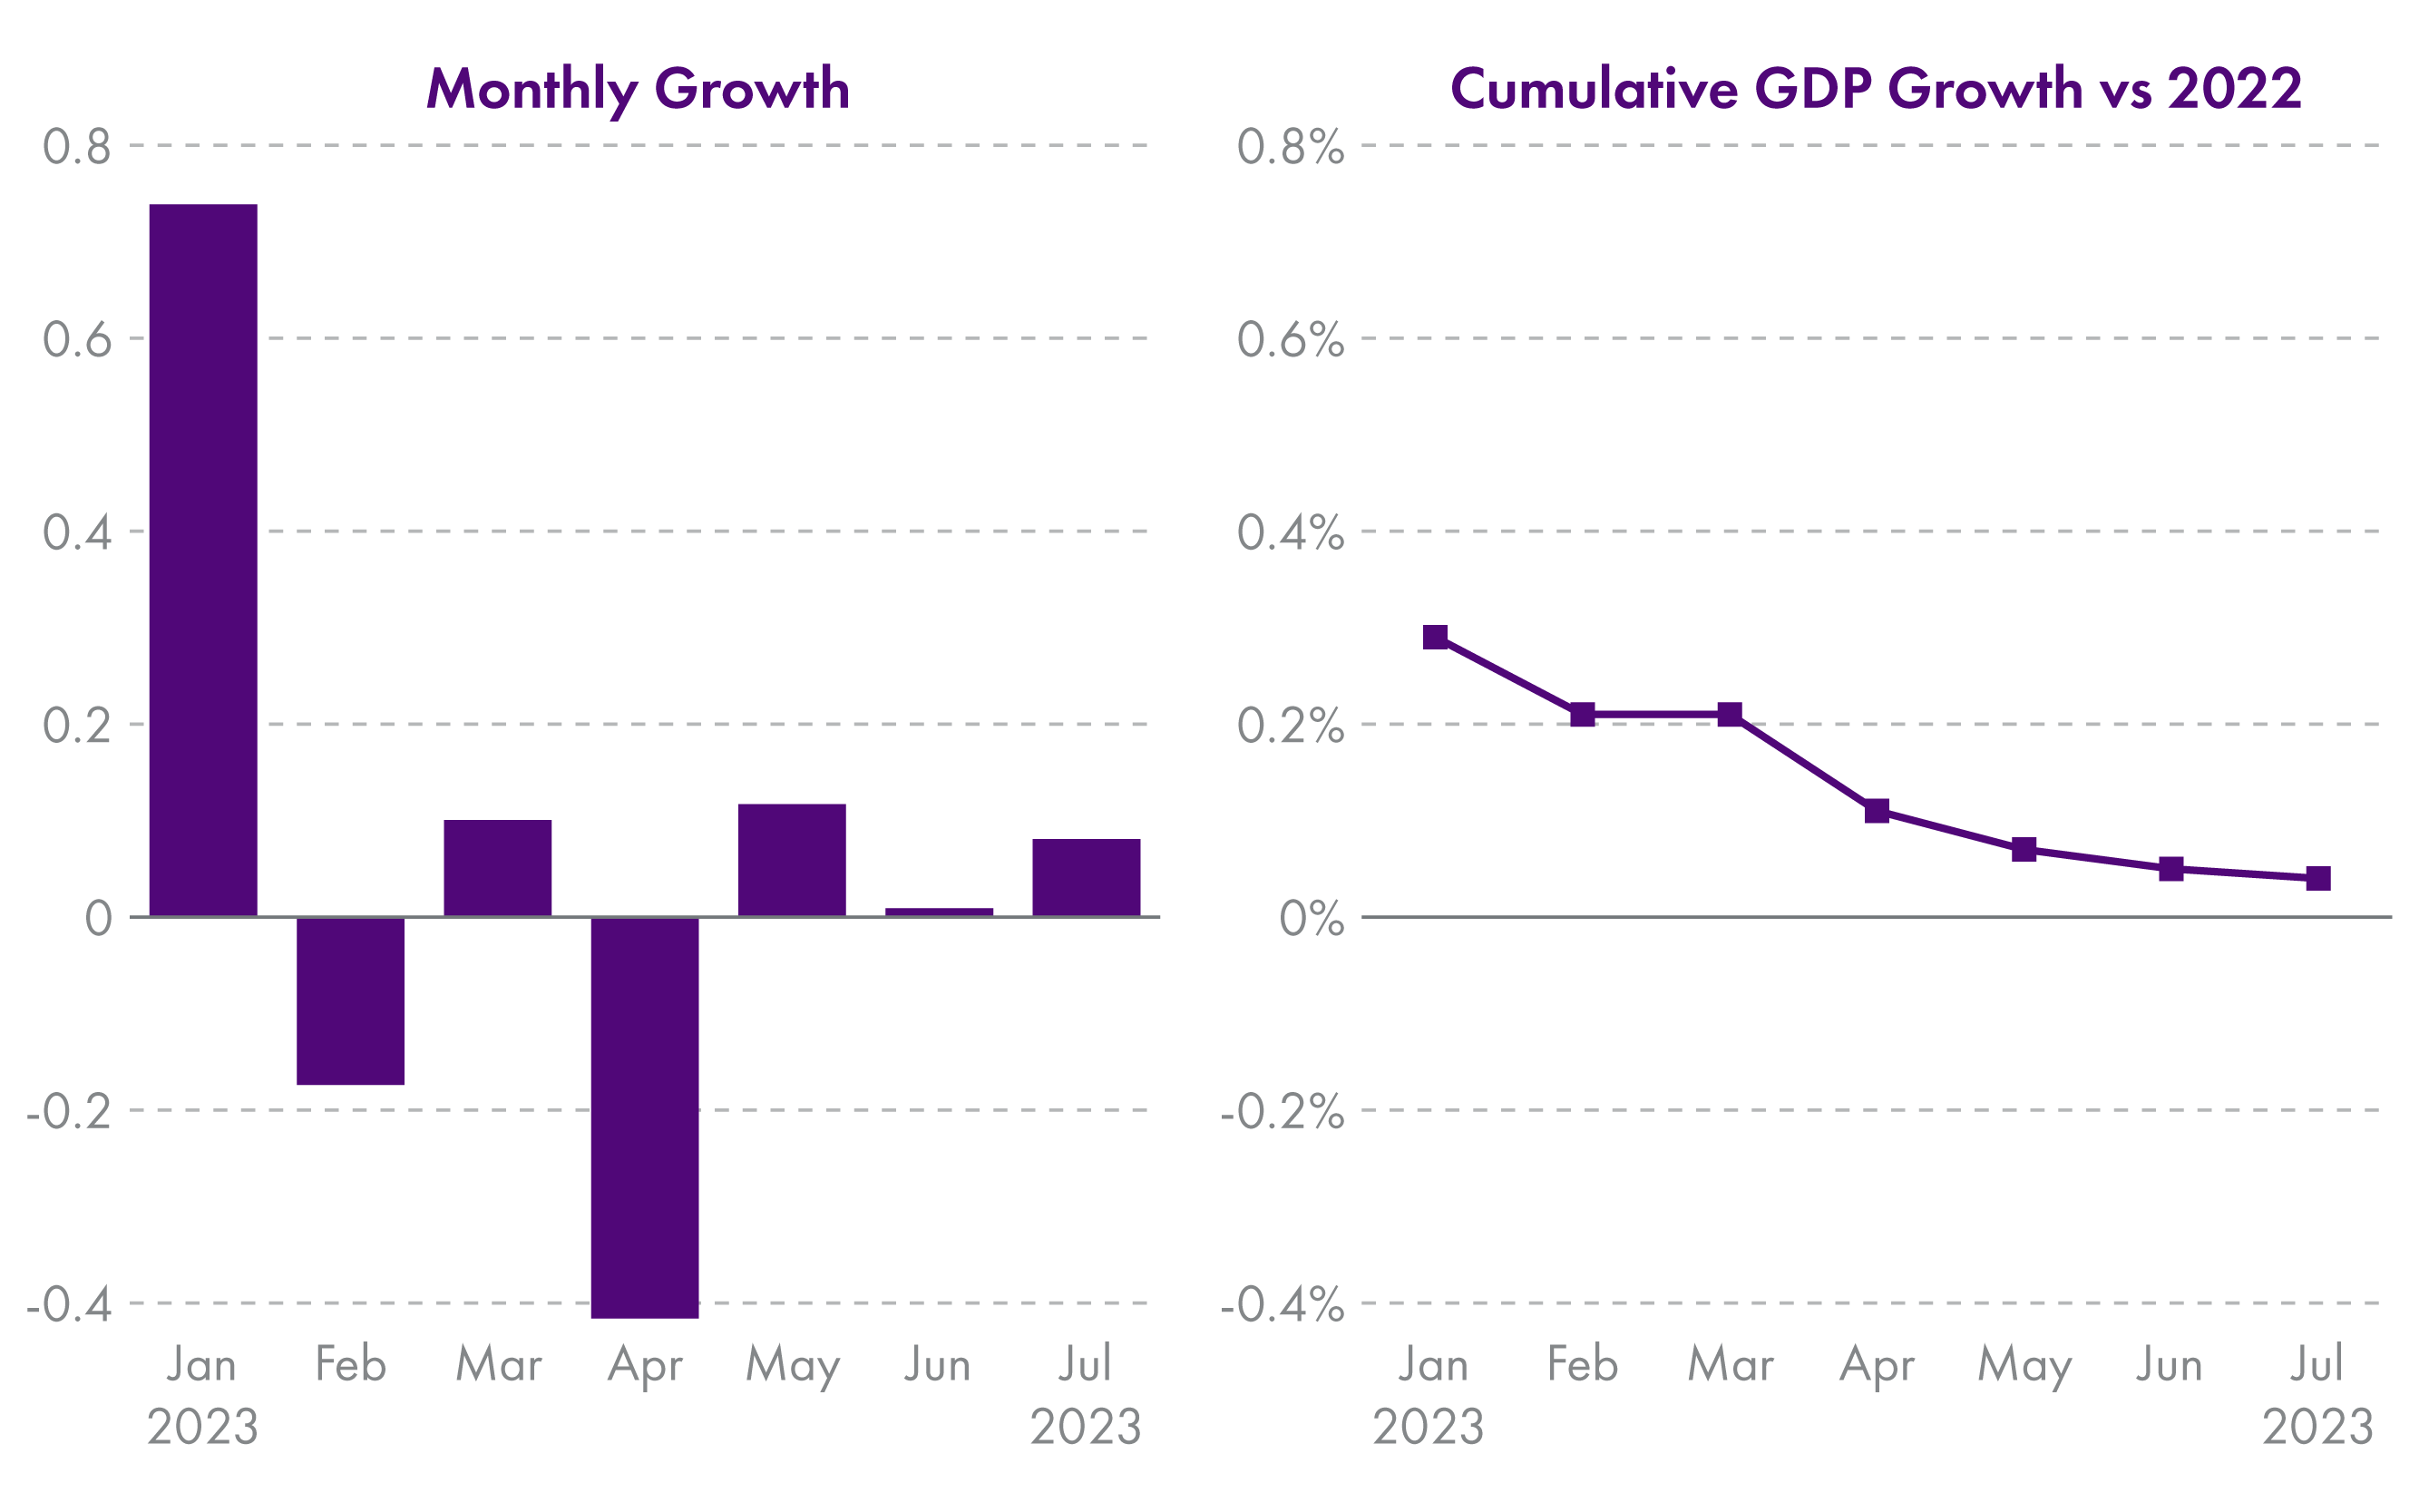 Chart 1a is a bar chart showing GDP estimates for the months January to July. It shows variations from month to month between 0.7% (approx) GDP to -0.4% GDP. Chart 1b is a line graph showing the cumulative GDP growth between January and July 2023 compared with 2022. Overall the line is downwards from 0.3% (approx) in January 2023 to just above 0% in July 2023